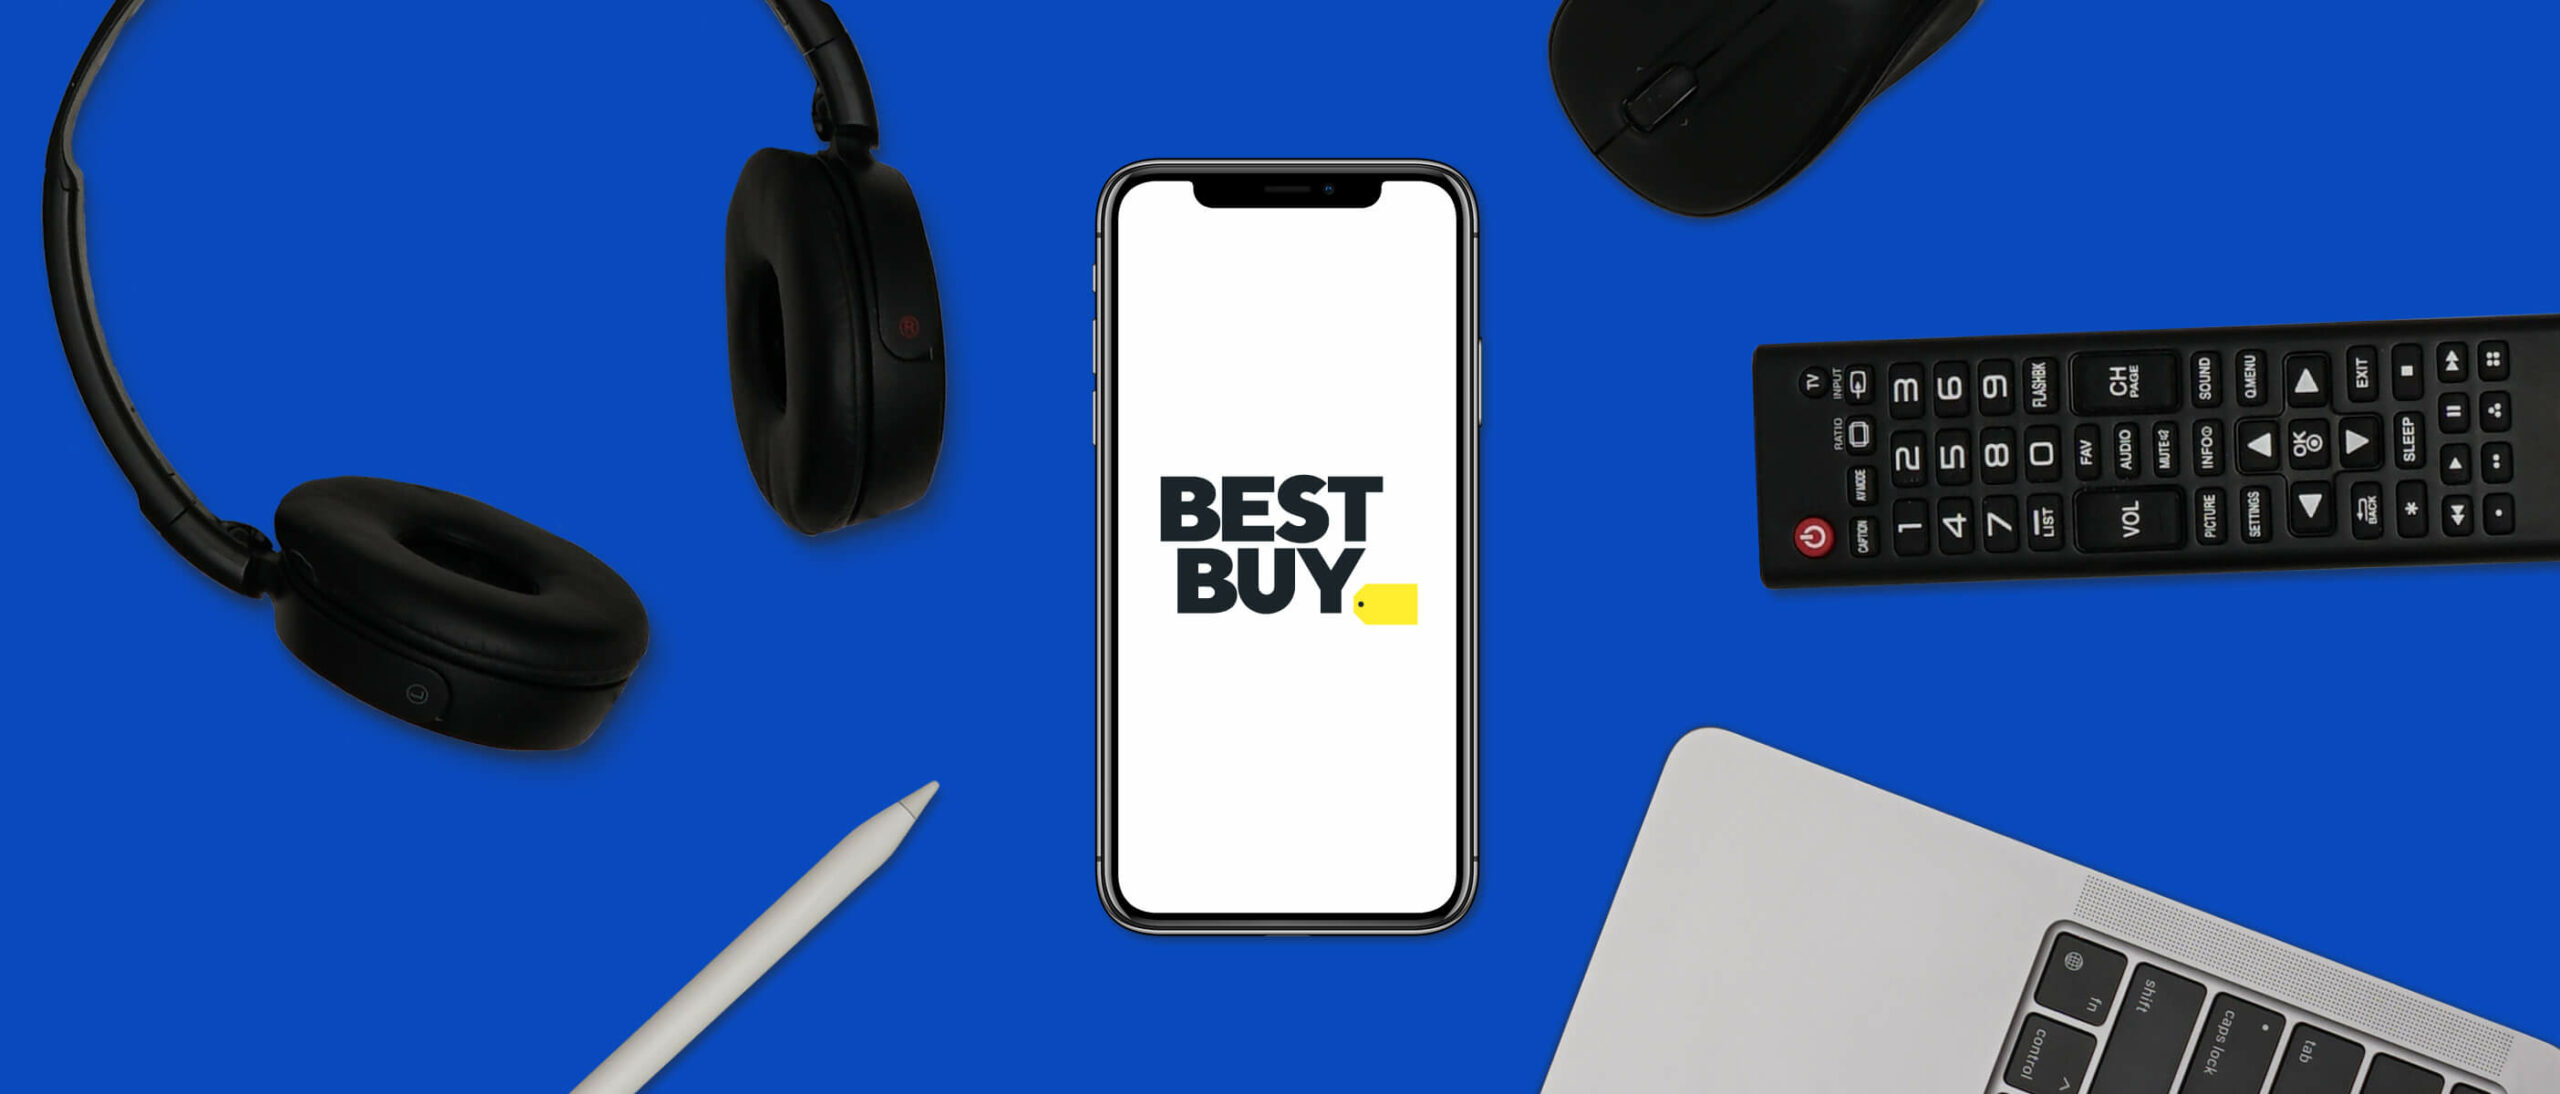 Does Best Buy Price Match? Everything You Need To Know